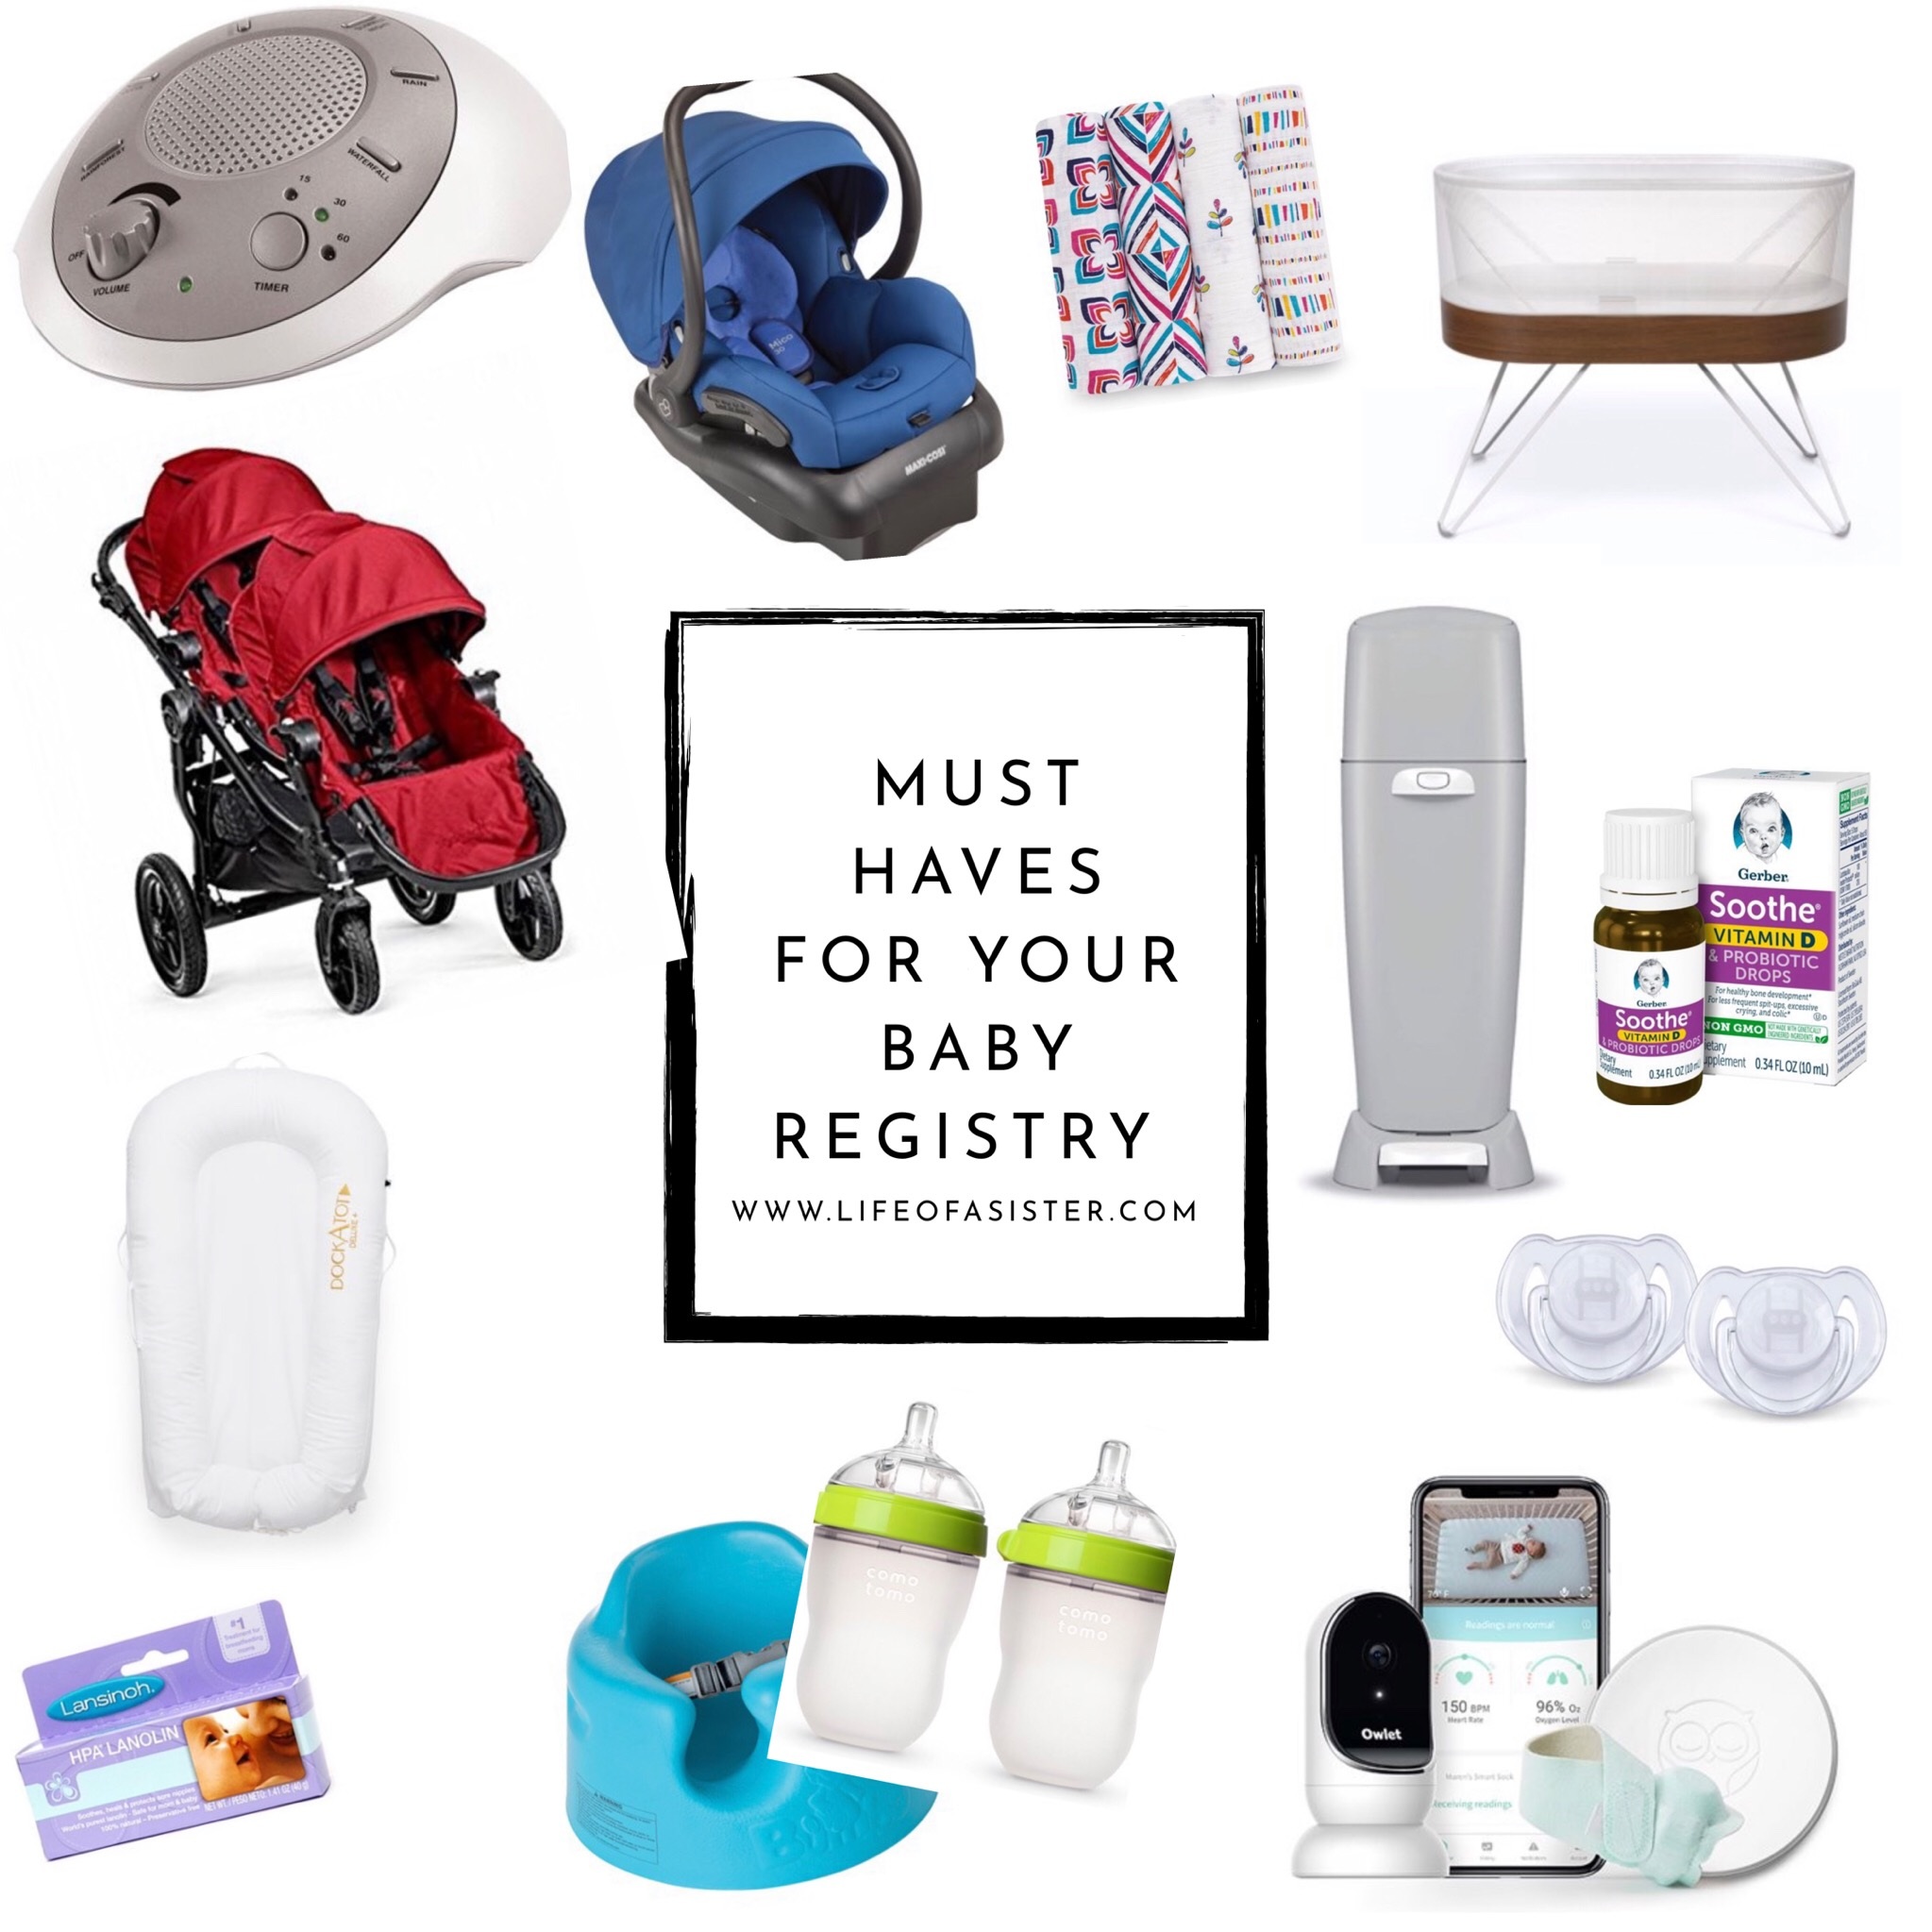 Baby Registry Essentials at Walmart featured by top US life and style blog, Life of a Sister